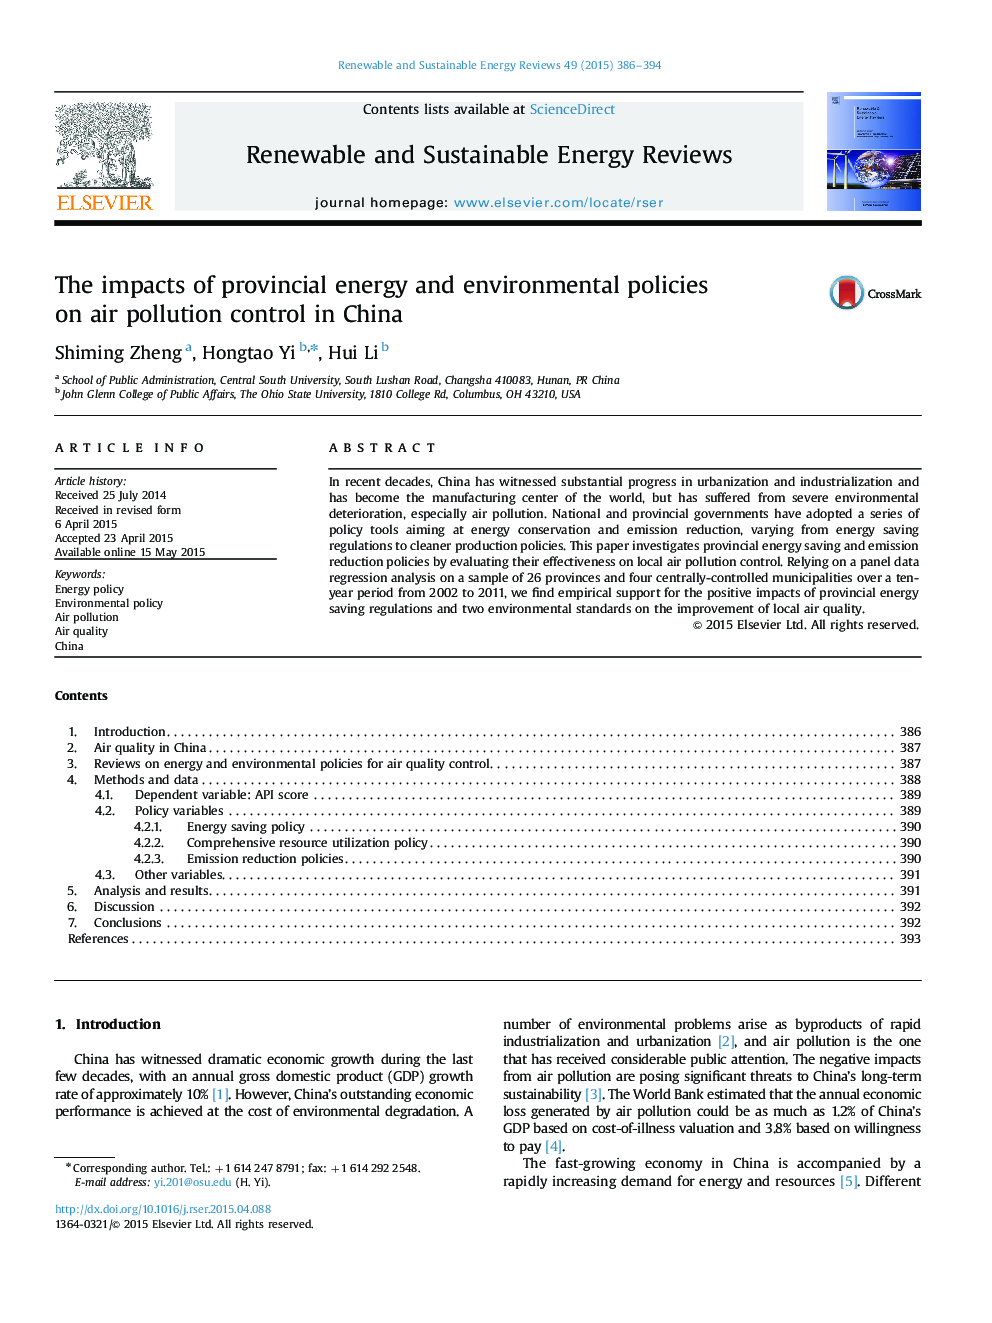 The impacts of provincial energy and environmental policies on air pollution control in China